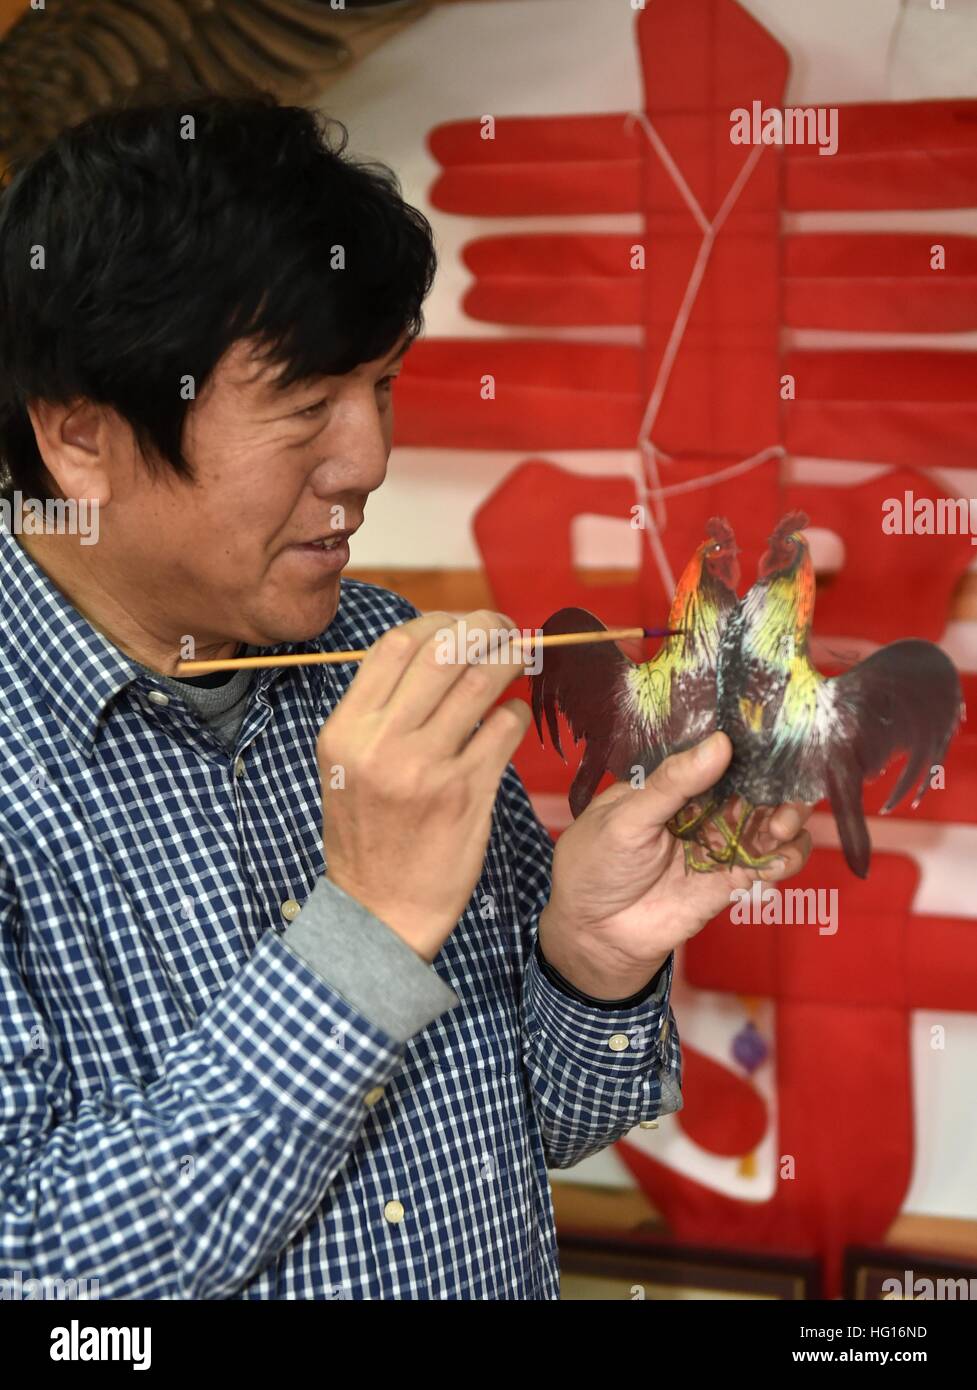 Tianjin, China. 4th Jan, 2017. Wei Guoqiu, the 4th generation of Kite Wei craftsman, makes a rooster-shaped kite to celebrate upcoming Chinese lunar new year at his studio in Tianjin, north China, Jan. 4, 2017. Kite making is a traditional Chinese folk handicraft, and Tianjin Kite Wei is famous for its development on some 200 kites with many new designs. © Lian Yi/Xinhua/Alamy Live News Stock Photo